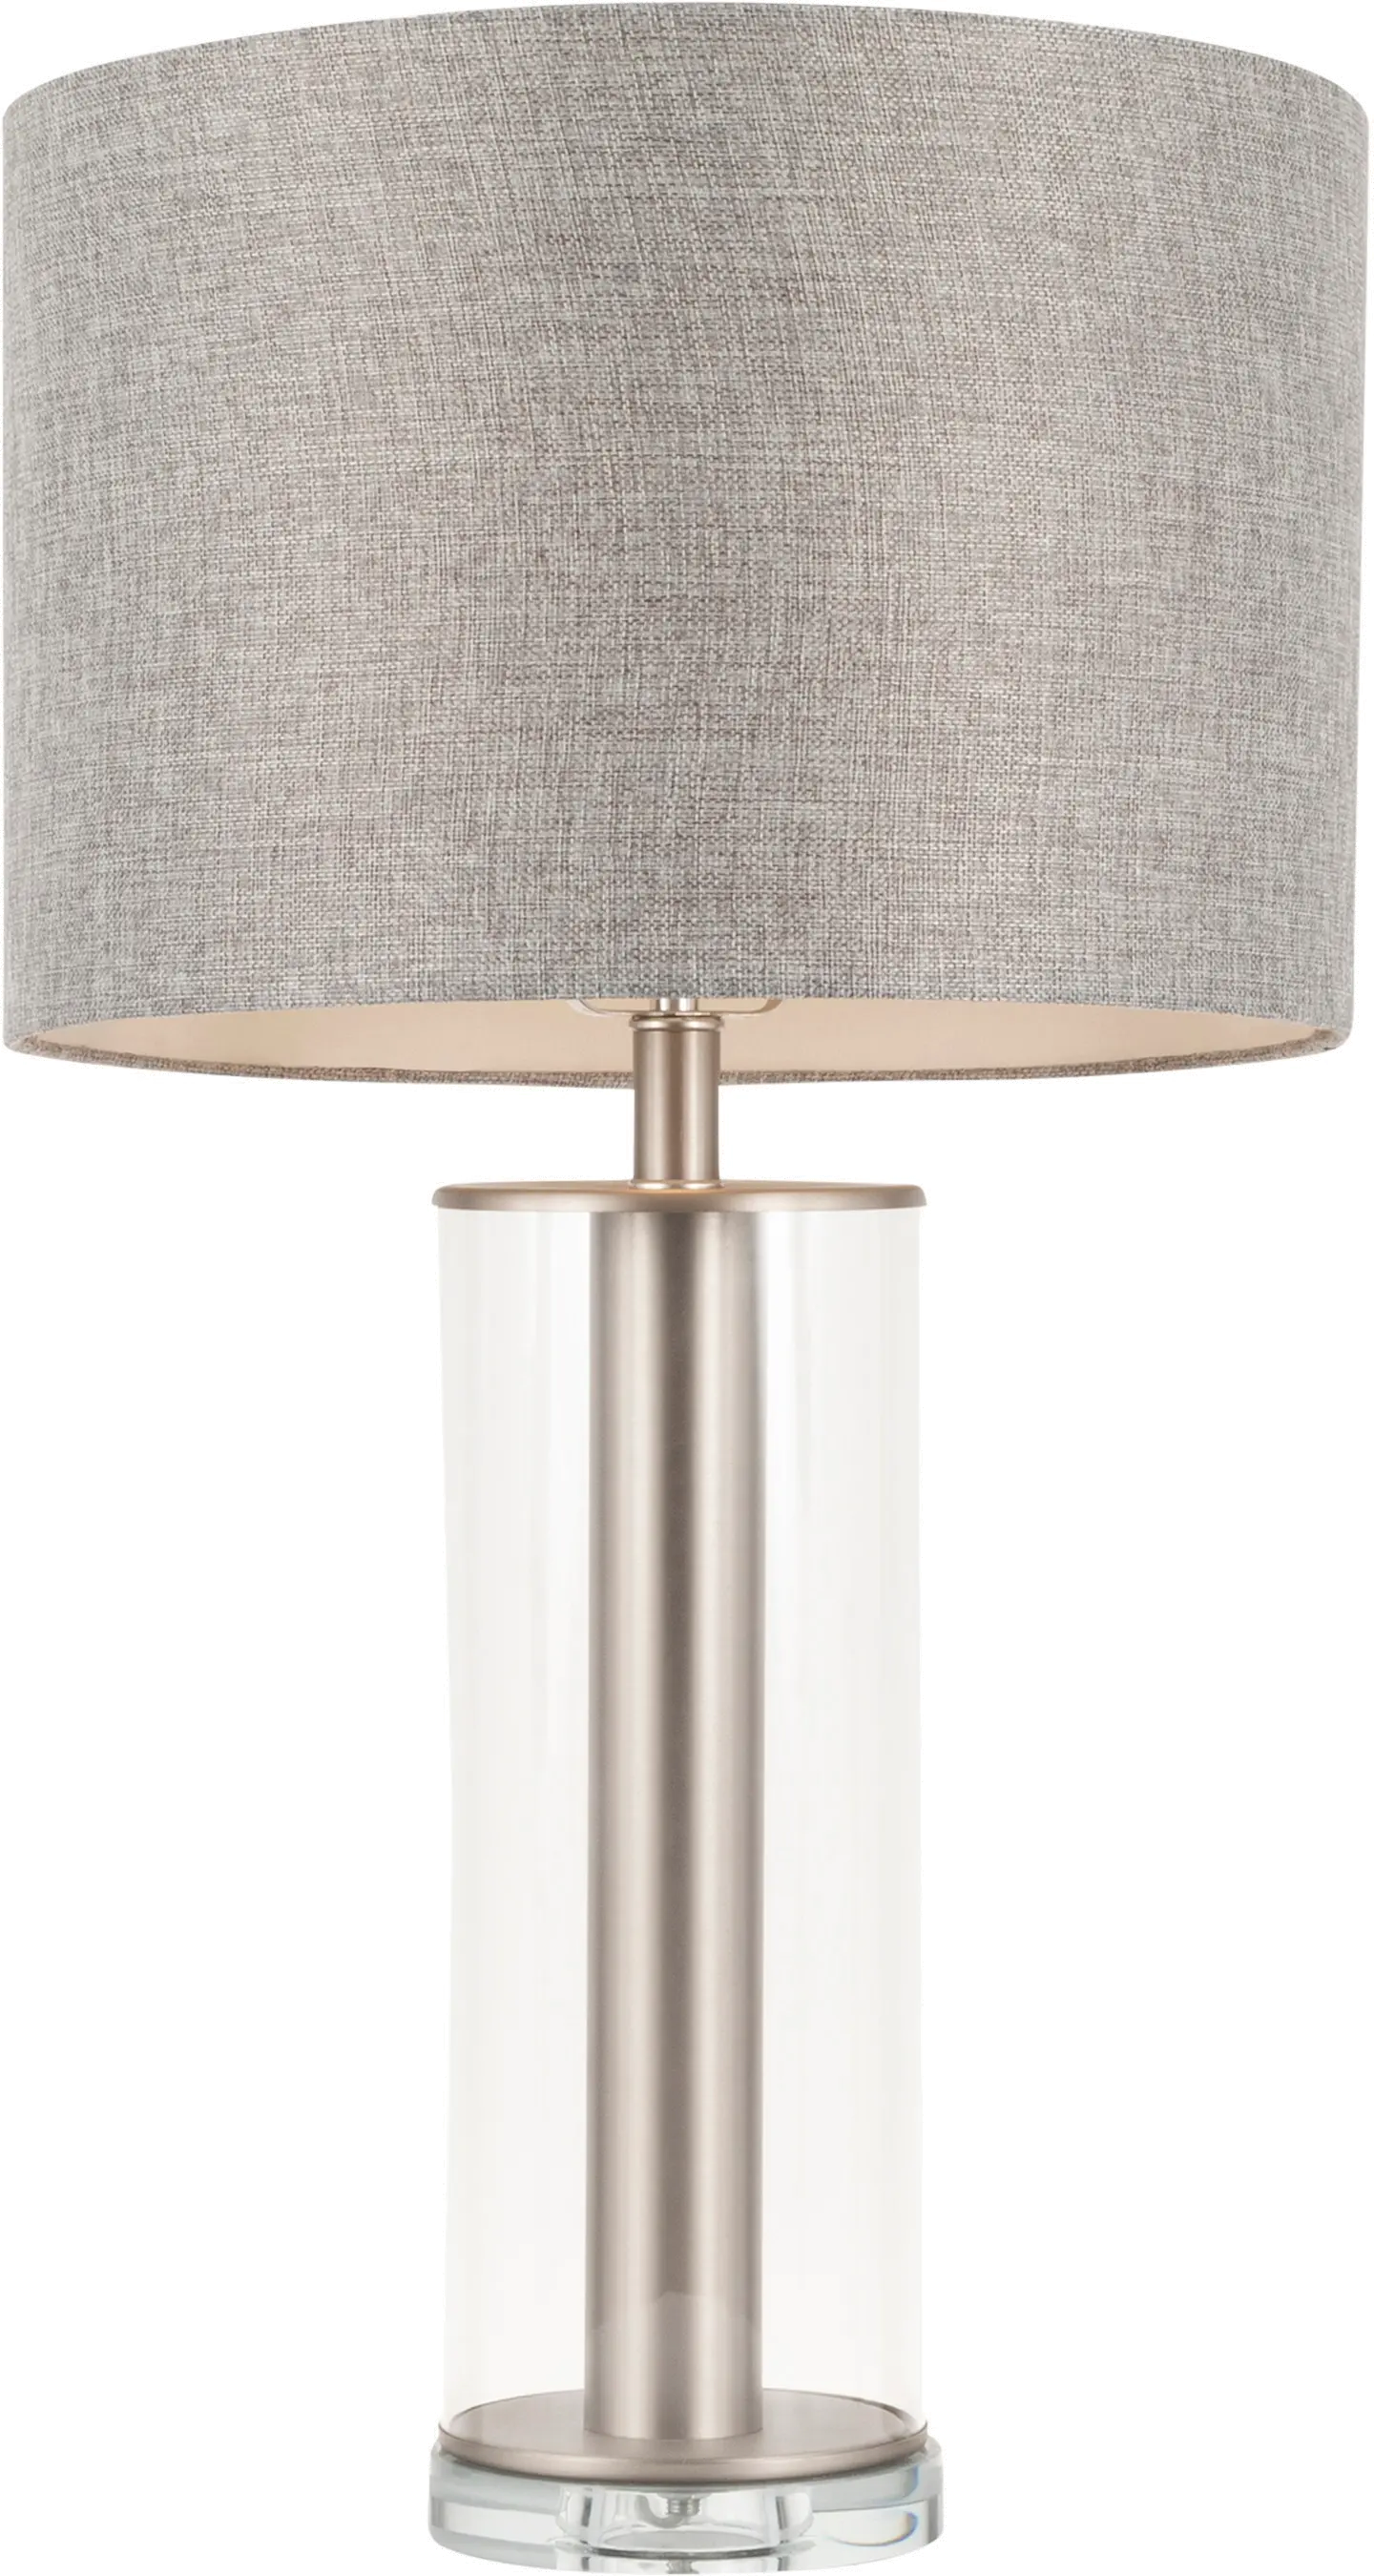 LS-GLCRTBGY Brushed Nickel Metal Table Lamp with Glass Base -  sku LS-GLCRTBGY